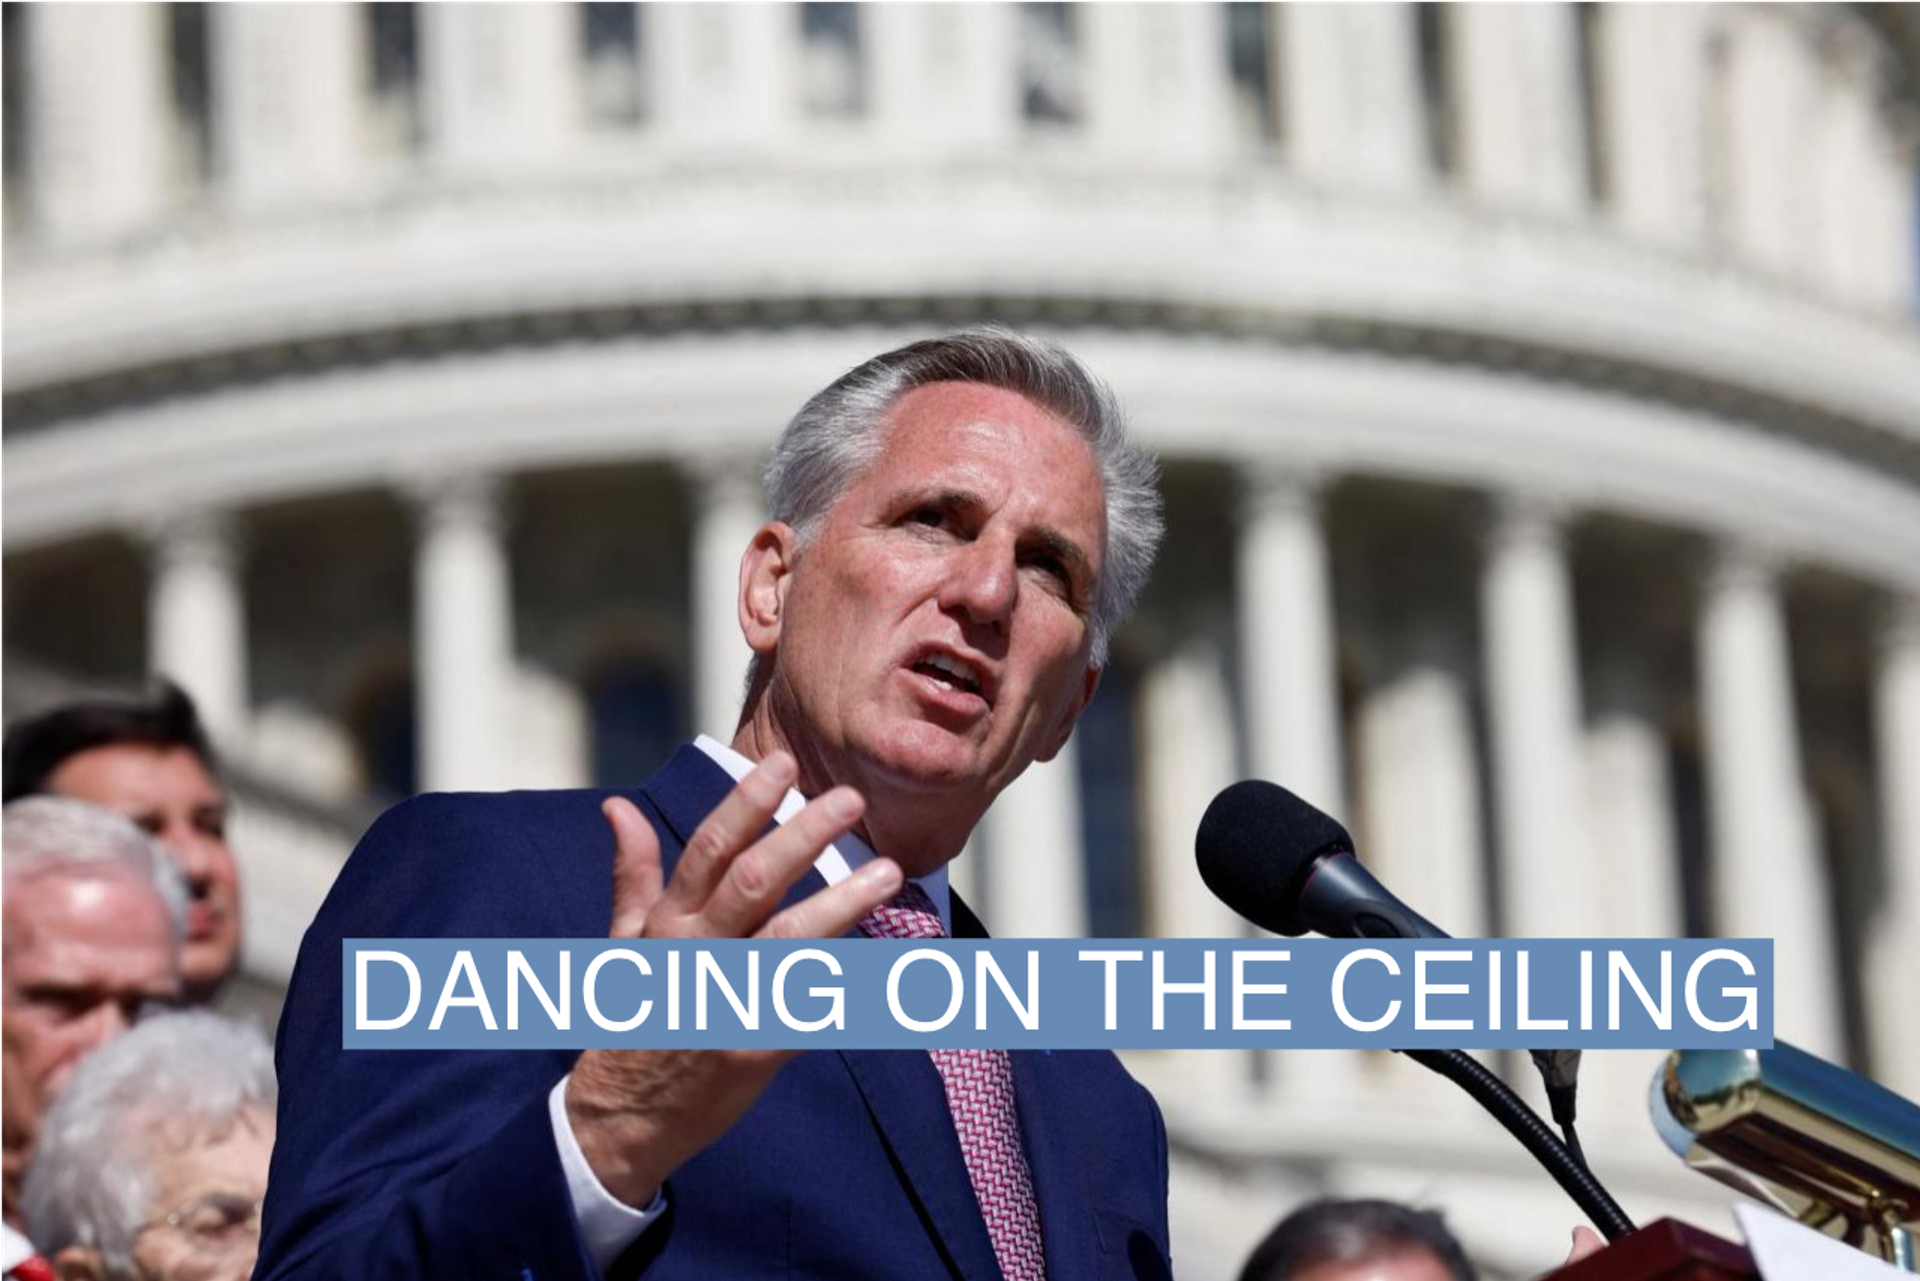 House Minority Leader Kevin McCarthy (R-CA) speaks during a news conference about the House Republicans "Commitment to America" outside the United States Capitol building in Washington, D.C., U.S., September 29, 2022. 